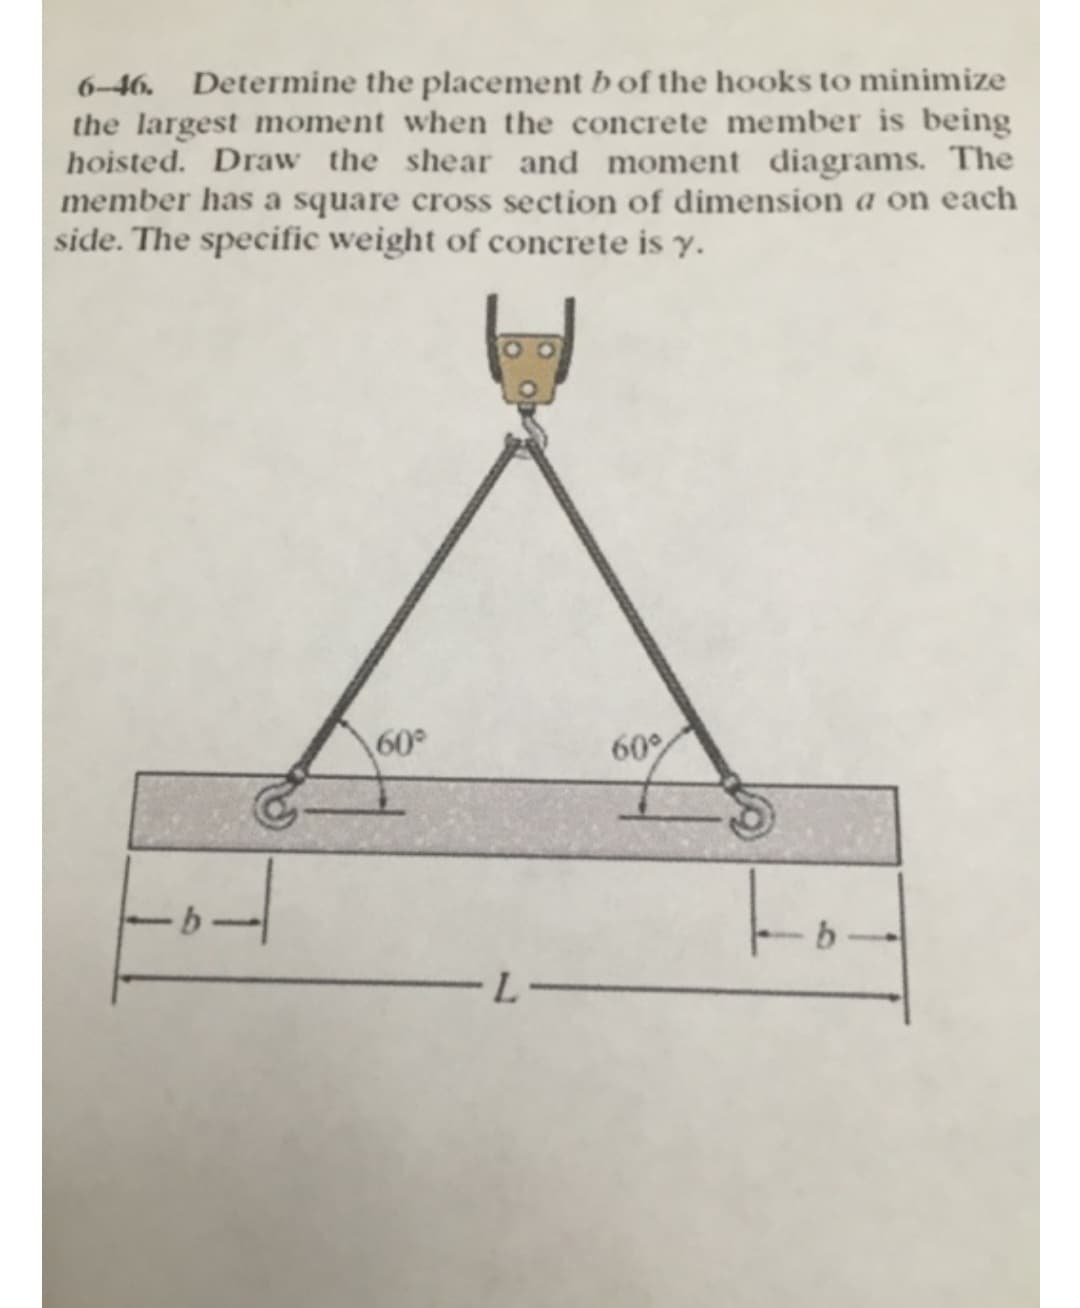 6-46. Determine the placement b of the hooks to minimize
the largest moment when the concrete member is being
hoisted. Draw the shear and moment diagrams. The
member has a square cross section of dimension a on each
side. The specific weight of concrete is y.
60°
B
-L-
60%